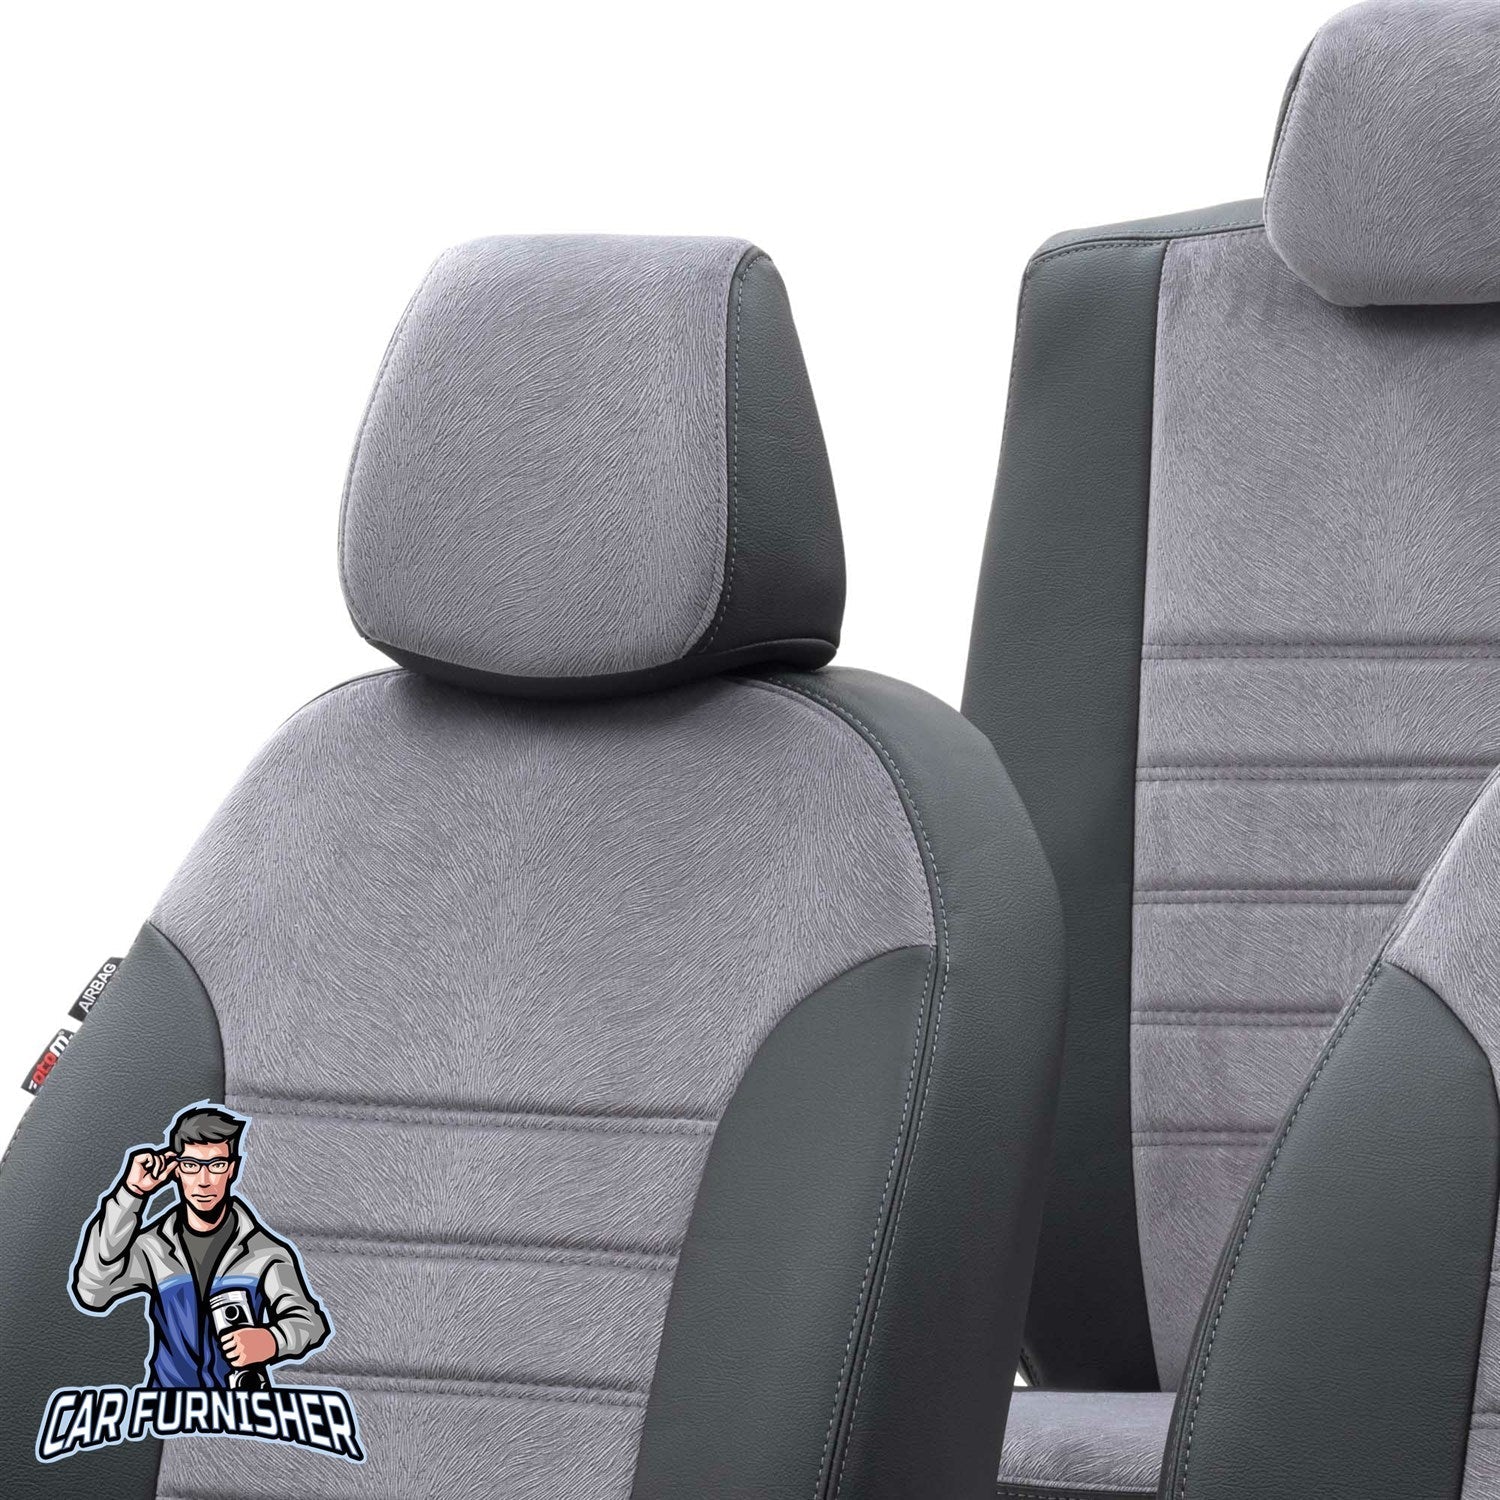 Renault Broadway Car Seat Covers 1983-2001 London Design Smoked Black Full Set (5 Seats + Handrest) Leather & Fabric